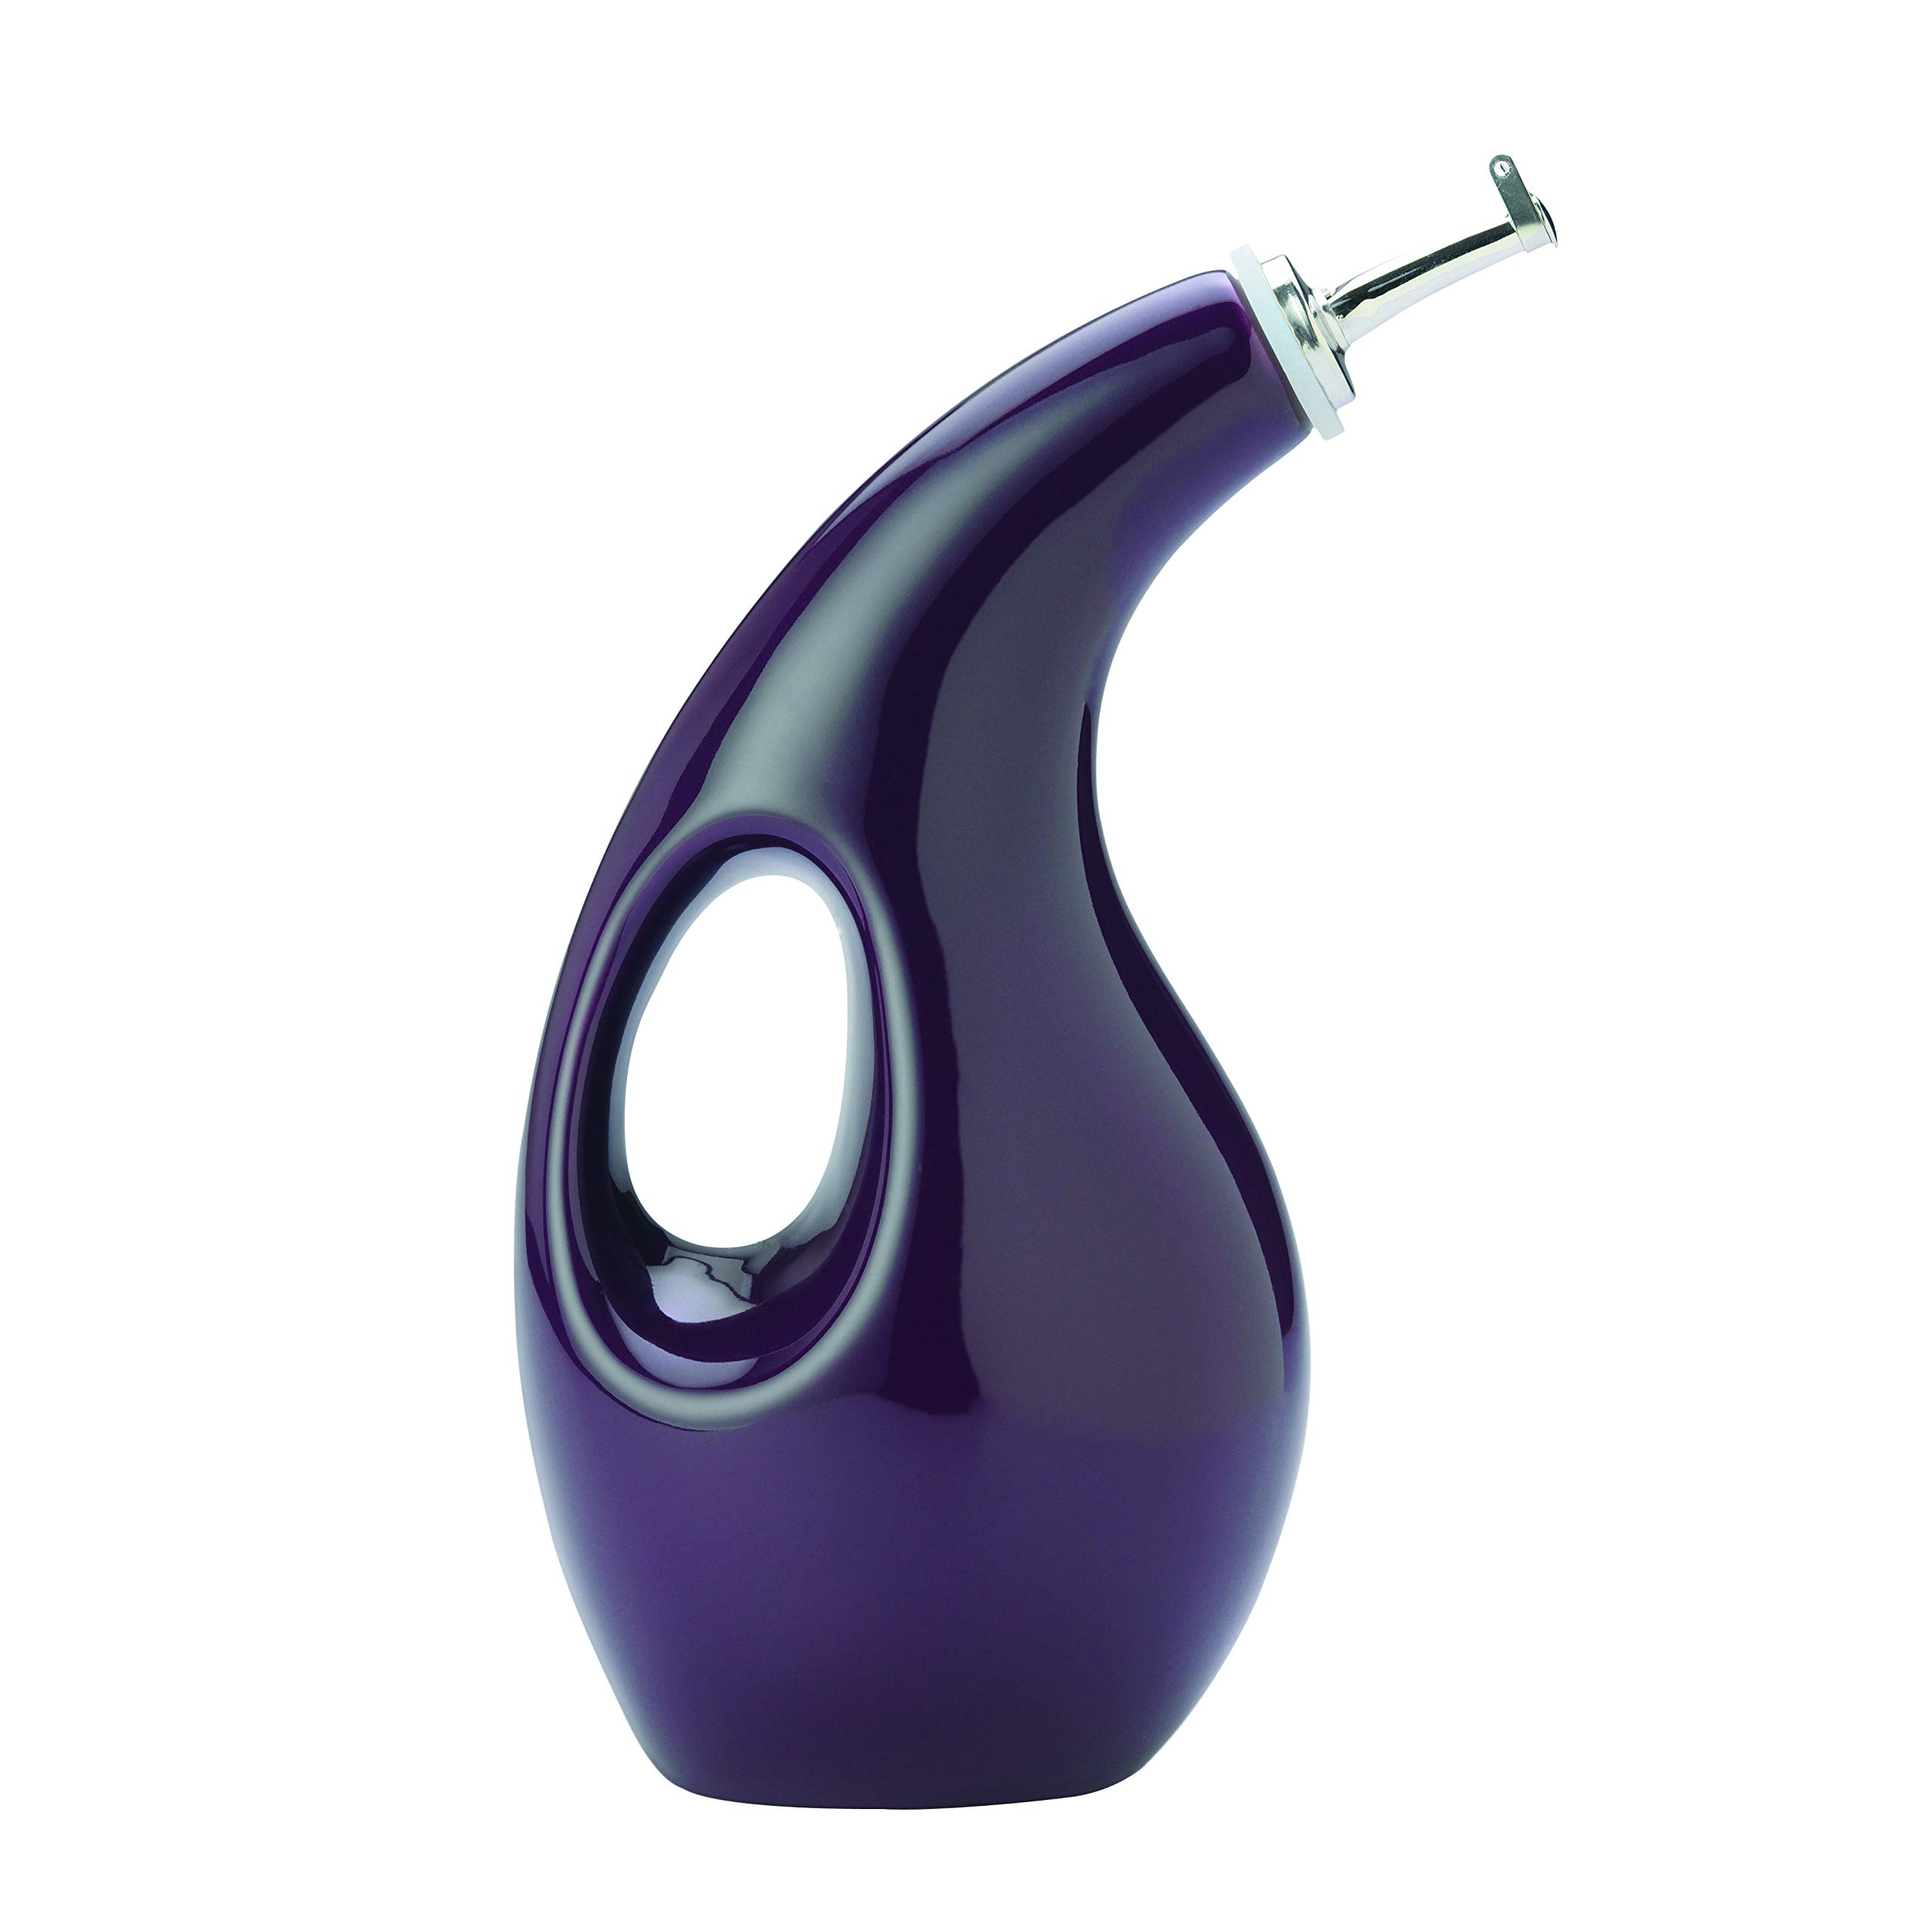 Rachael Ray Solid Glaze Ceramics EVOO Olive Oil Bottle Dispenser (Purple) $8 + Free Shipping w/ Prime or on $35+